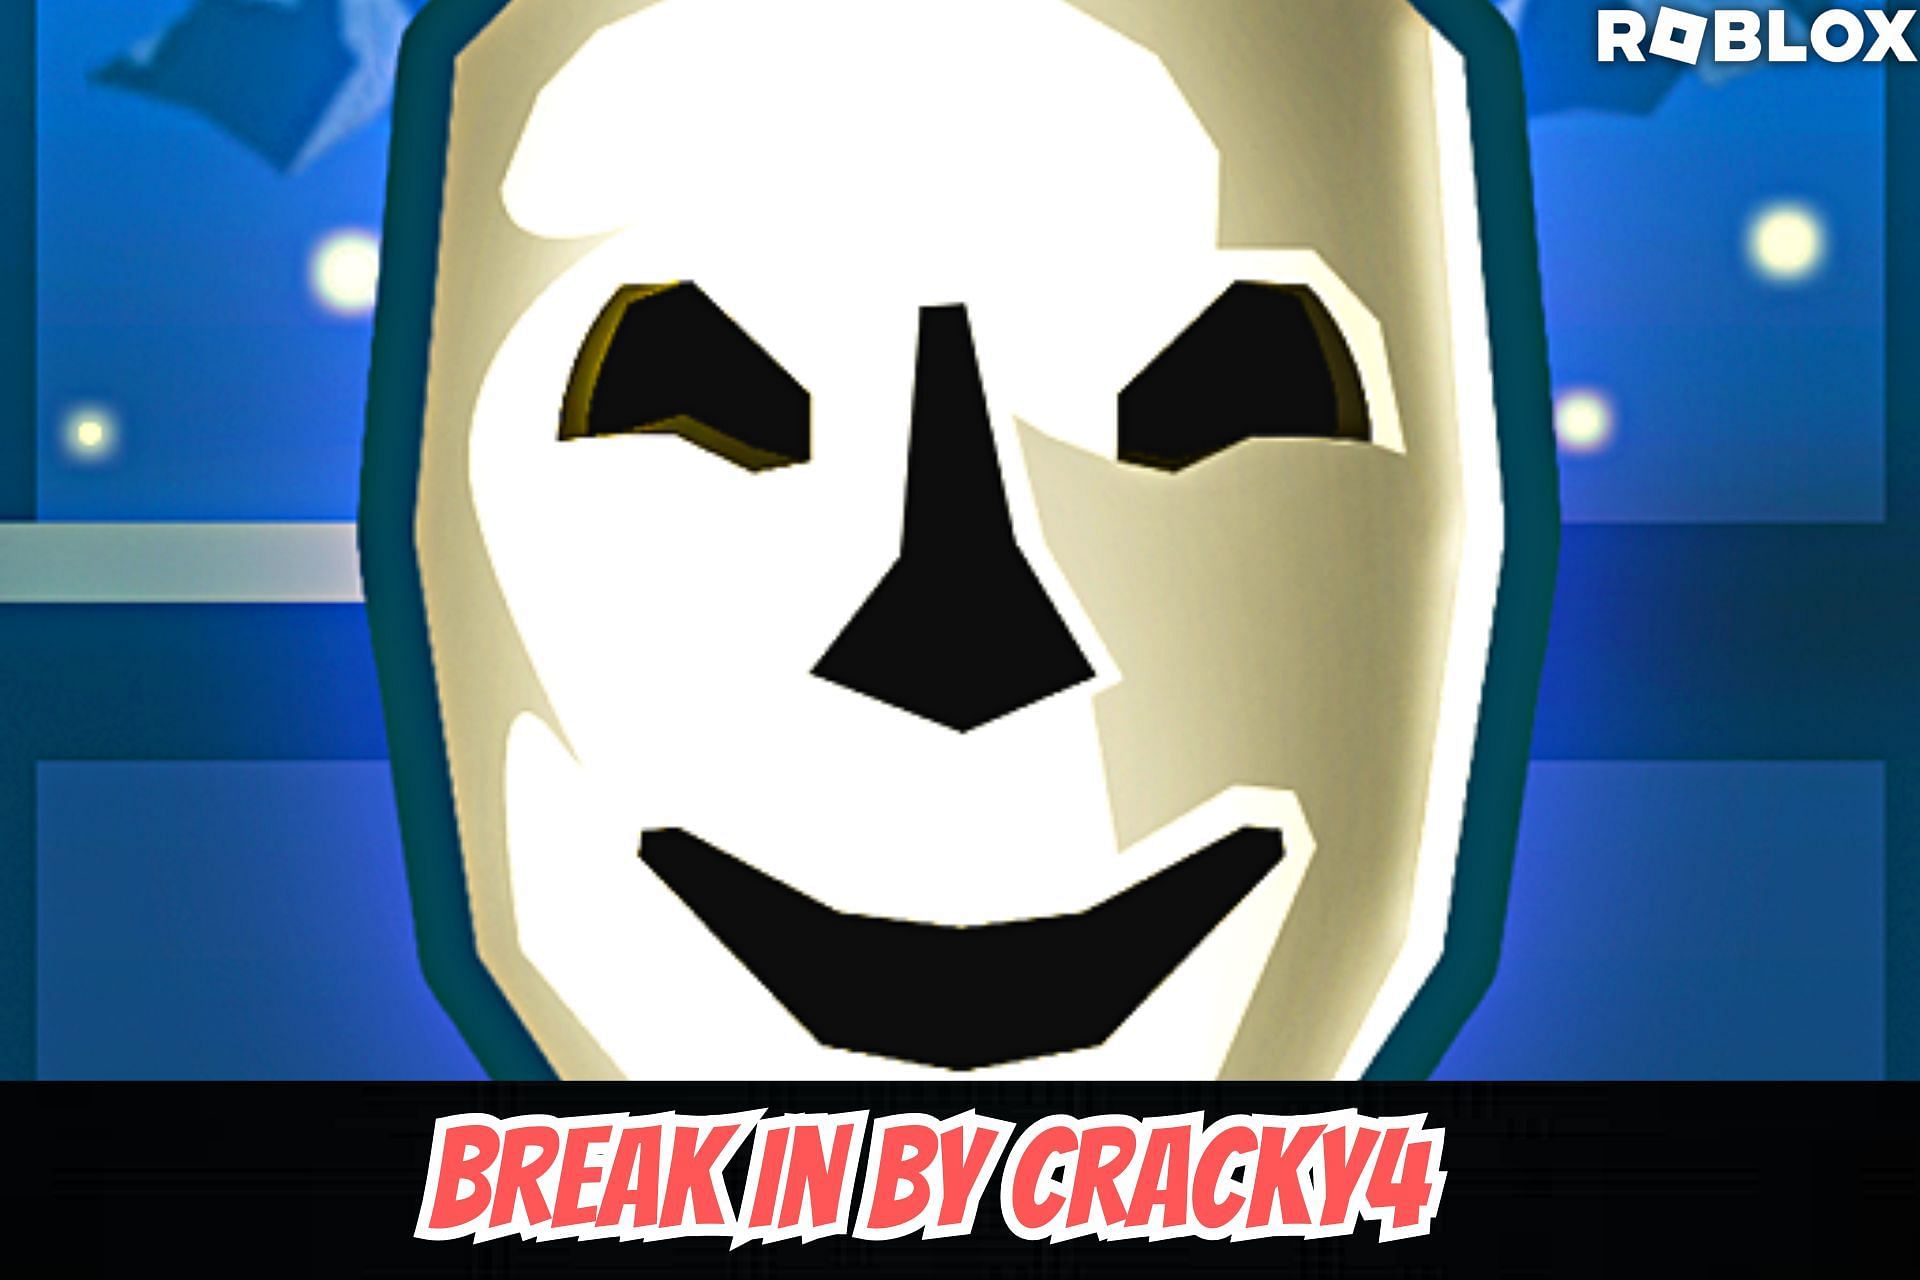 News roblox on X: BREAKING: Roblox has put the Epic Face back on